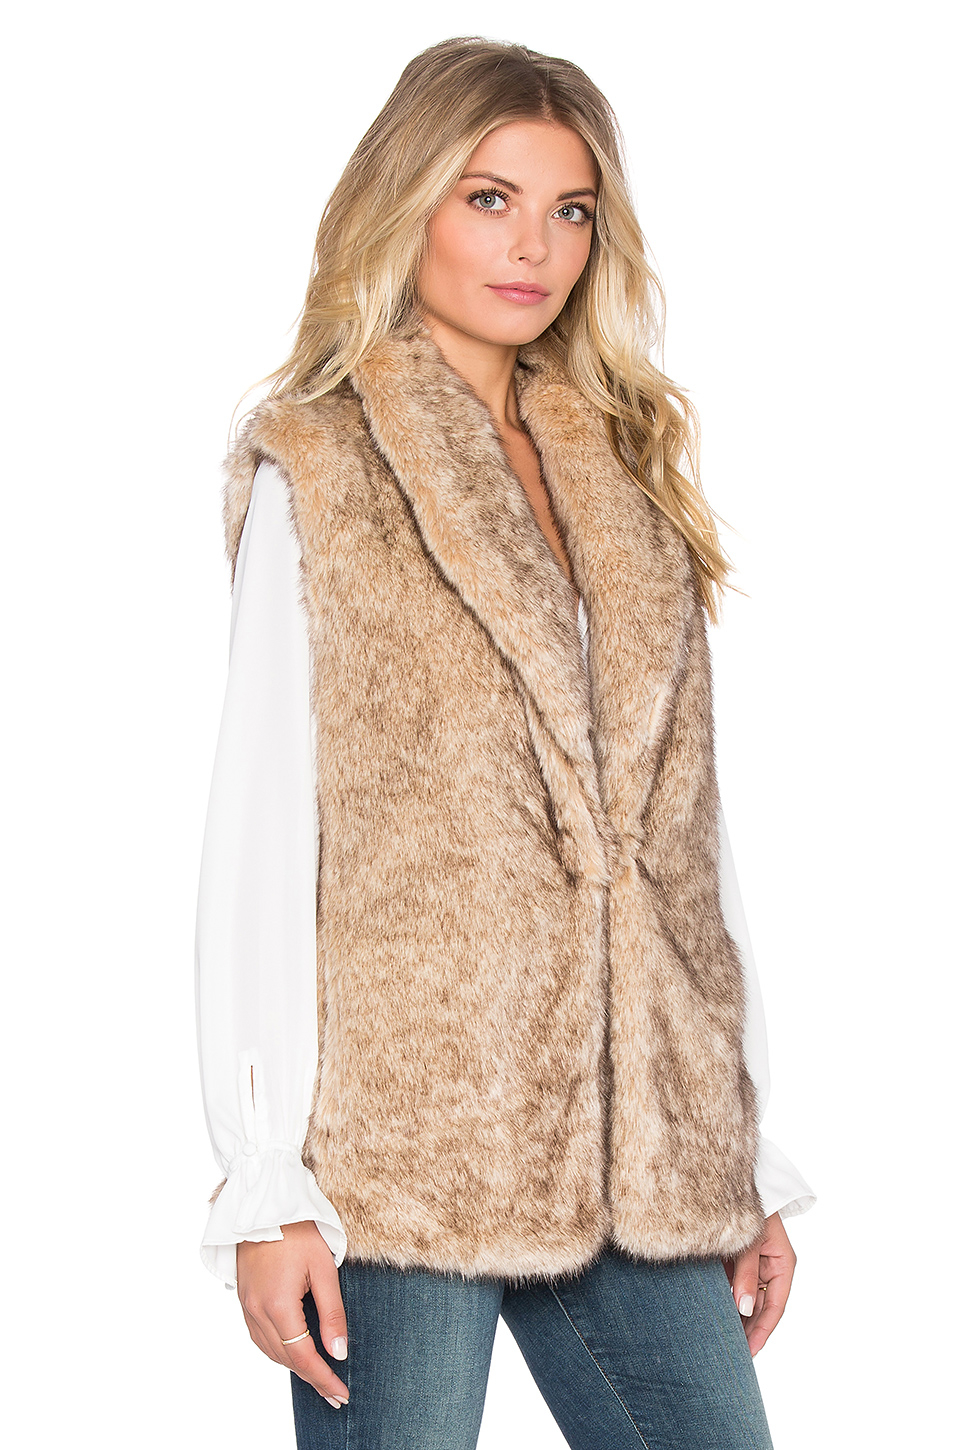 Sanctuary Hollywood Faux Fur Vest in Natural | Lyst